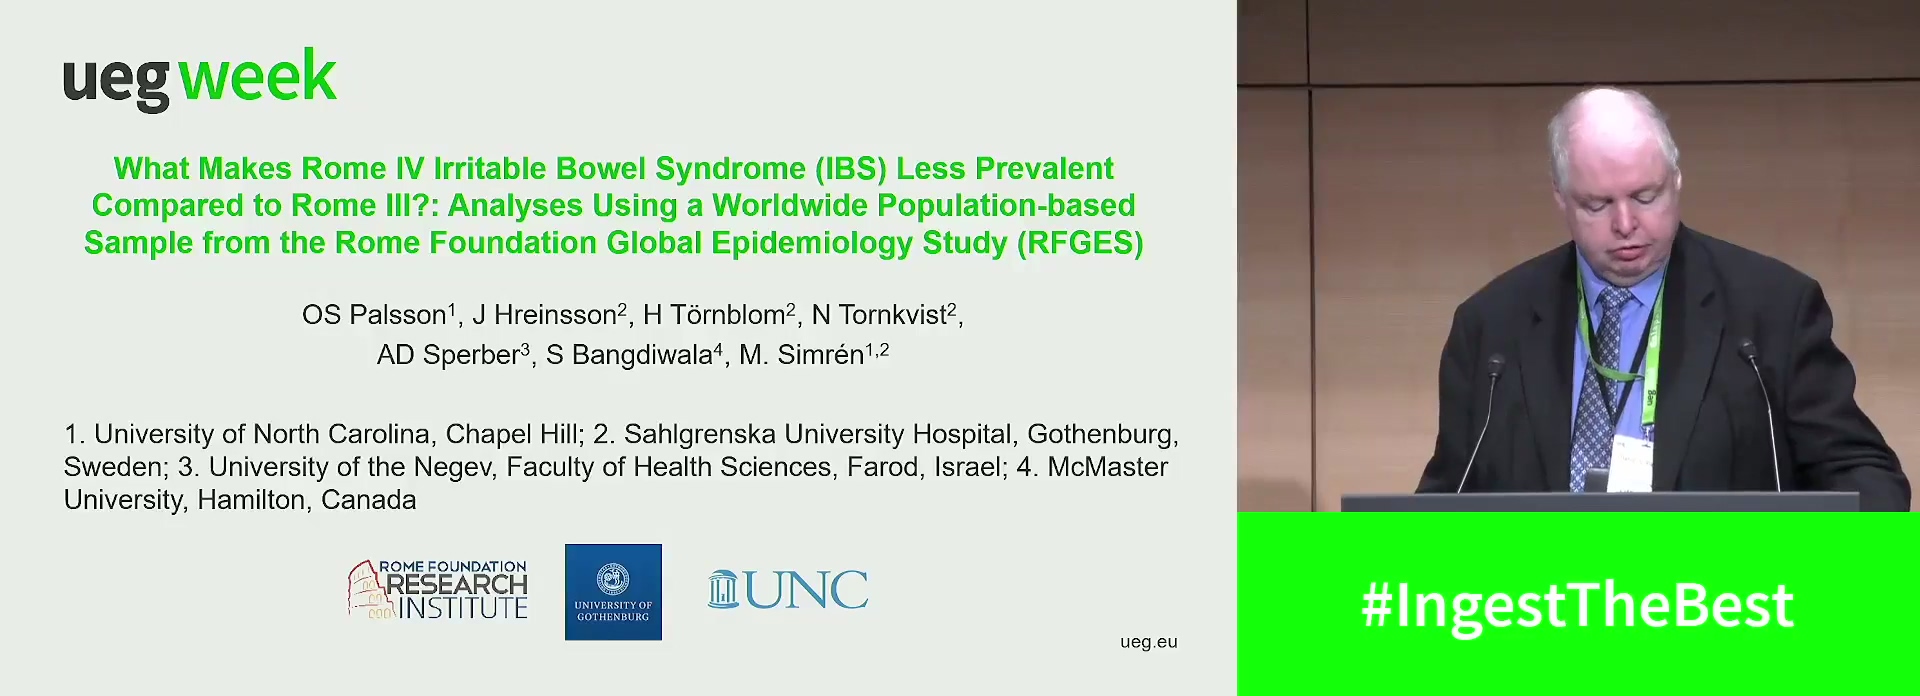 CAUSES OF LOWER ROME IV VS. ROME III IRRITABLE BOWEL SYNDROME (IBS) PREVALENCE: ANALYSIS OF DATA FROM THE ROME FOUNDATION GLOBAL EPIDEMIOLOGY STUDY (RFGES)